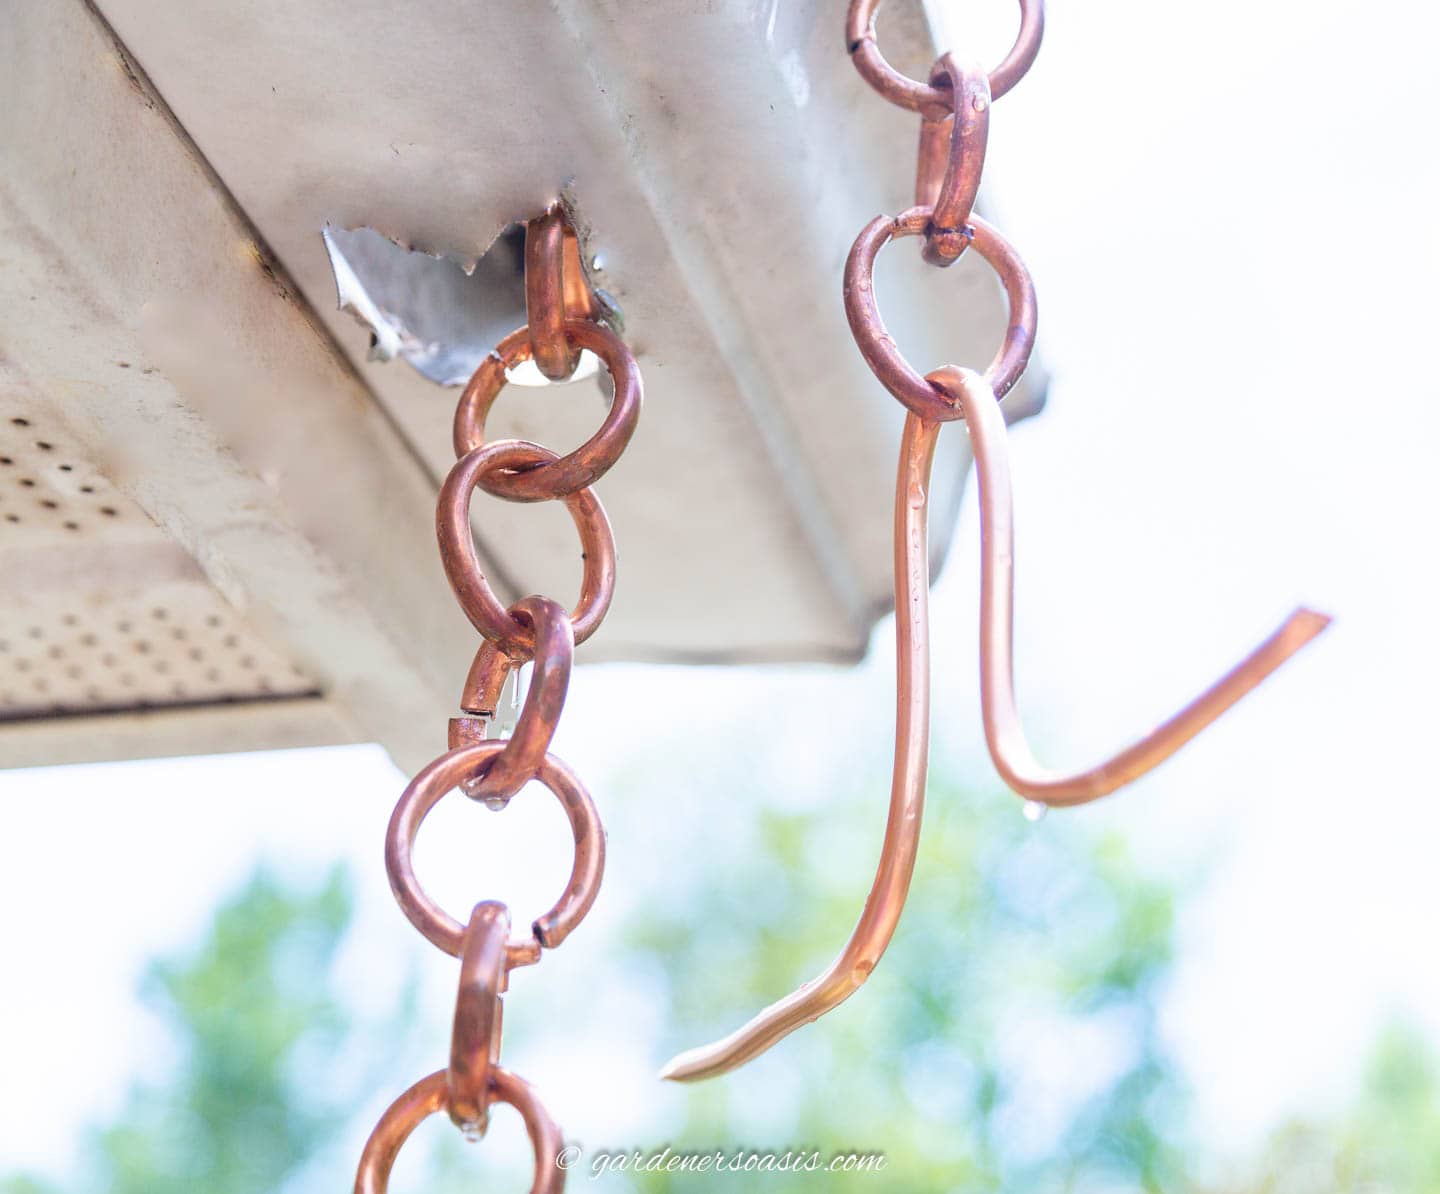 Rain chain hanging over a gutter with a V-hook attached on one end